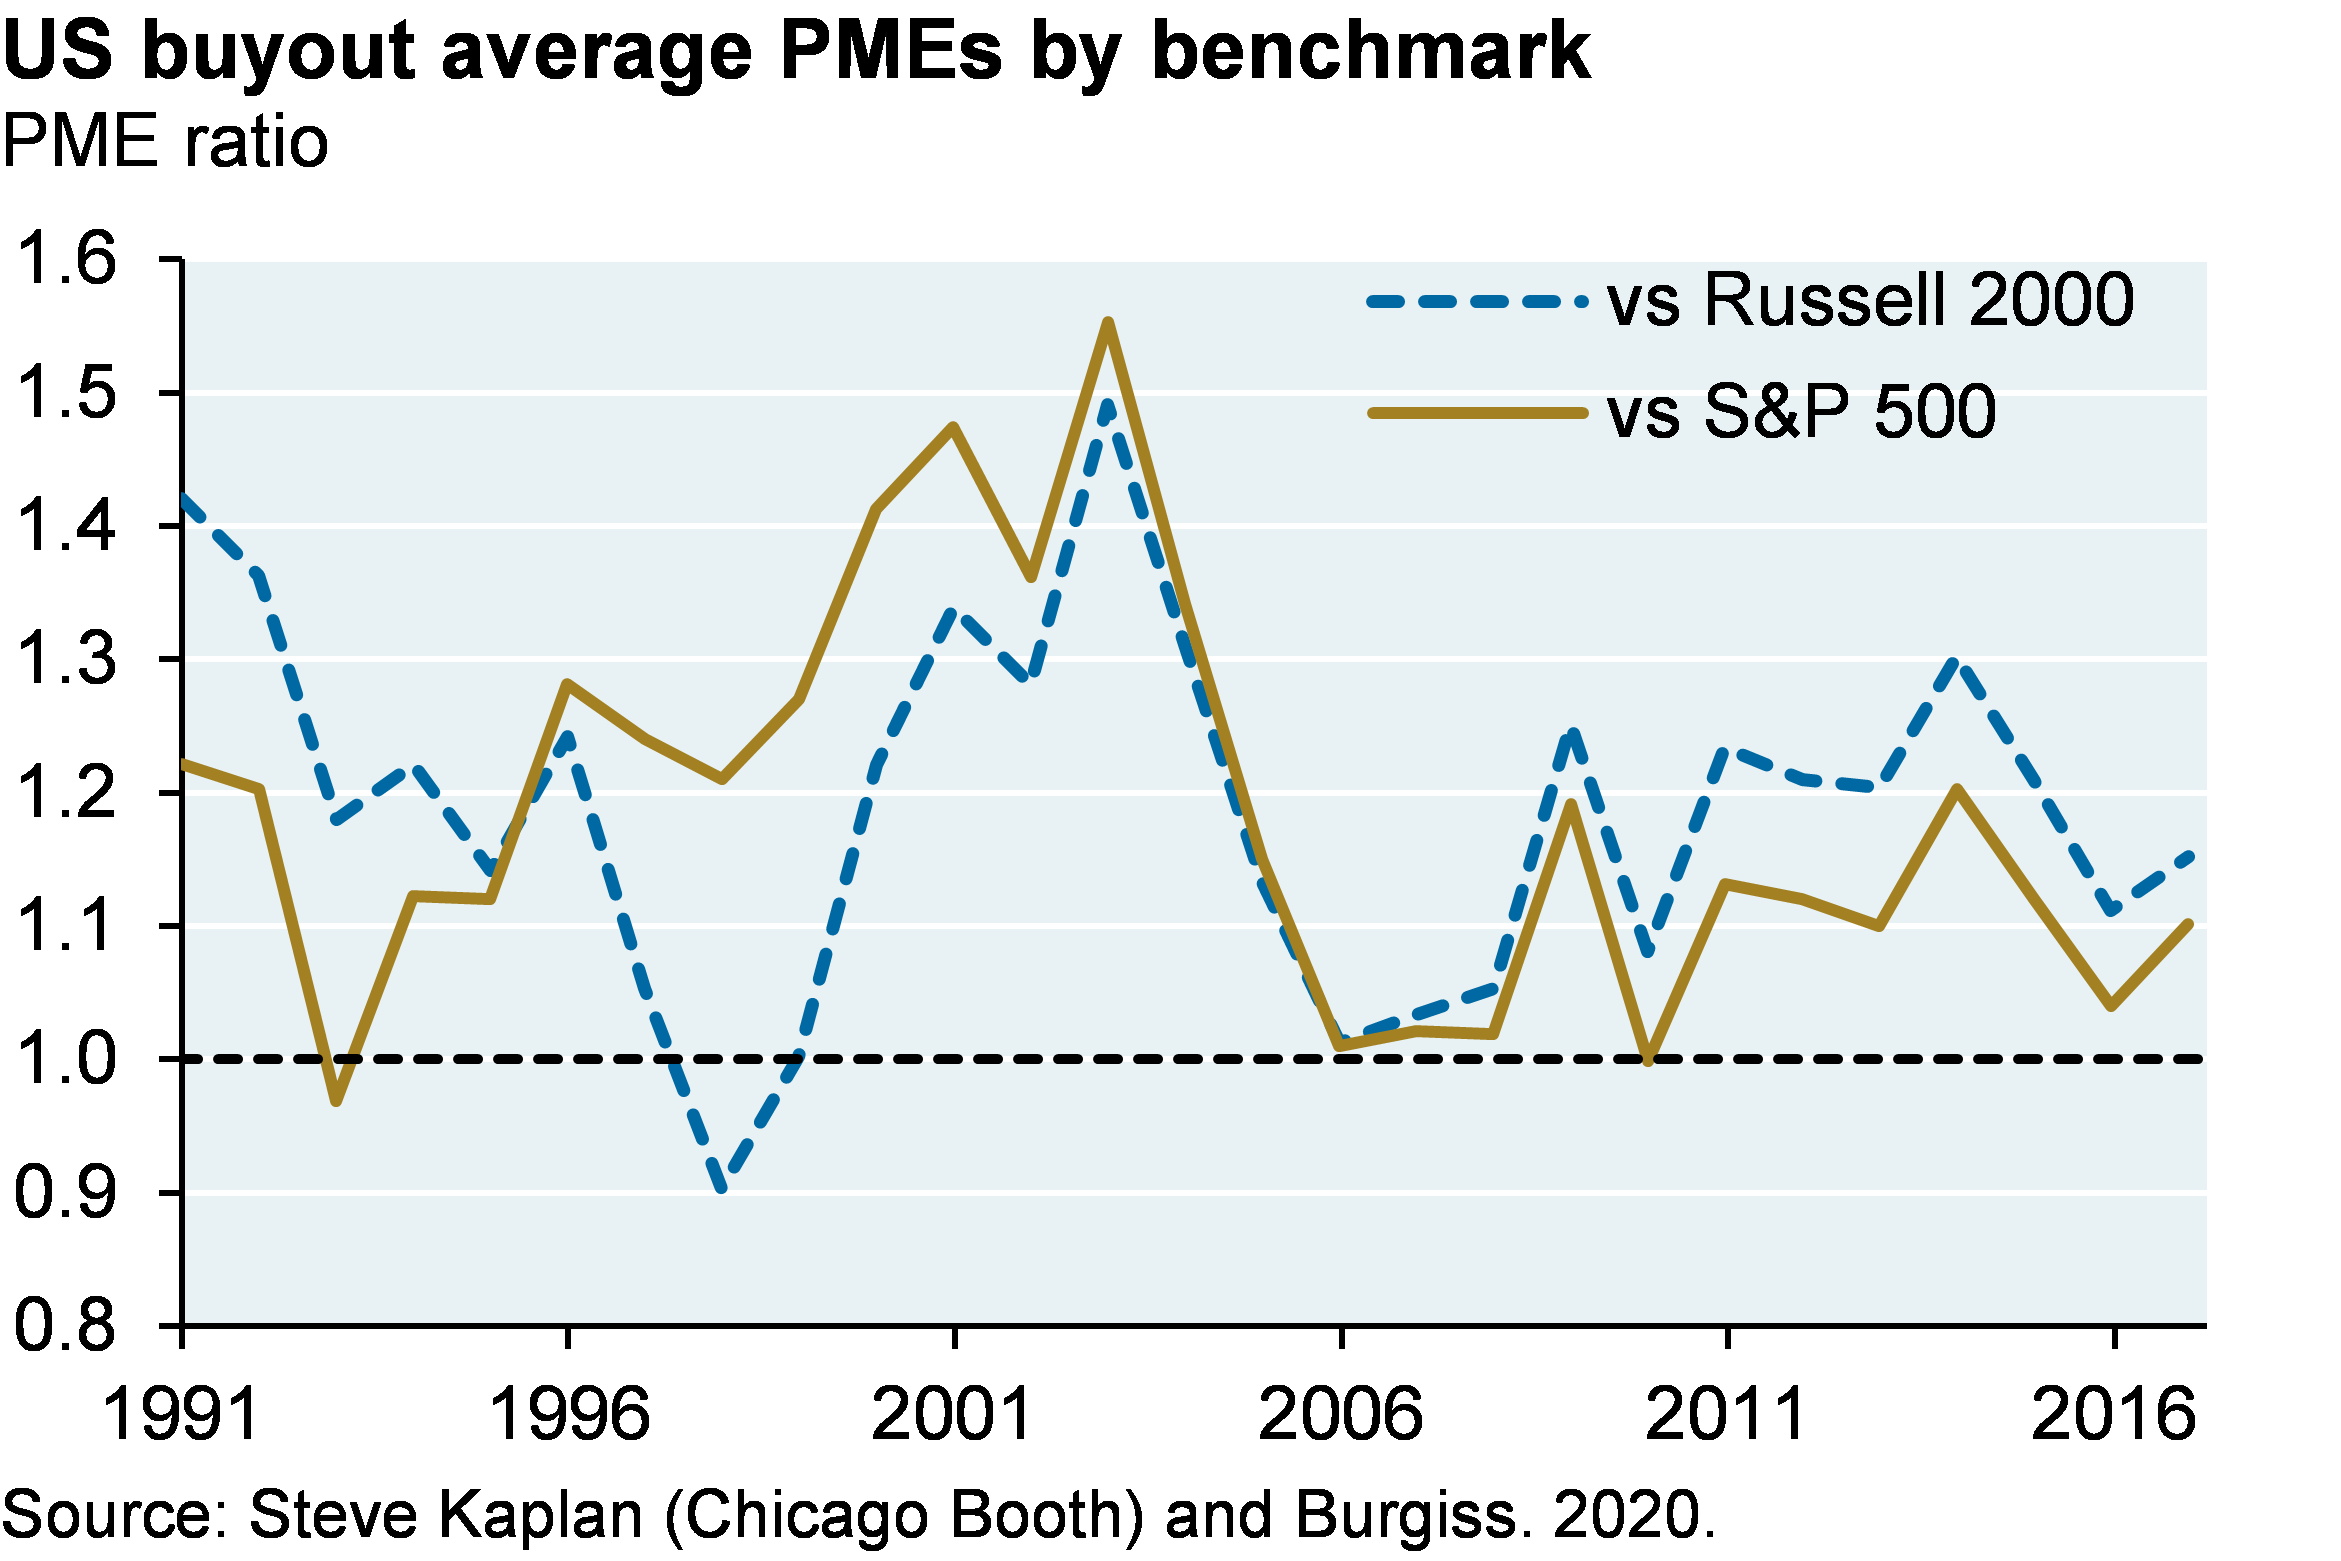 Line chart which shows average US buyout PMEs versus both the Russell 2000 and the S&P 500 by vintage year. PME compares private equity commitments and distributions to investments in public equity markets in the same time period. The result is an MOIC of private equity performance vs the public equity benchmark. The chart illustrates the relative performance differences between the S&P 500 and Russell 2000 over time. Since the S&P 500 has outperformed the Russell 2000 since 2006, buyout PMEs vs the Russell 2000 are higher than buyout PMEs vs S&P 500 over the same time period. 